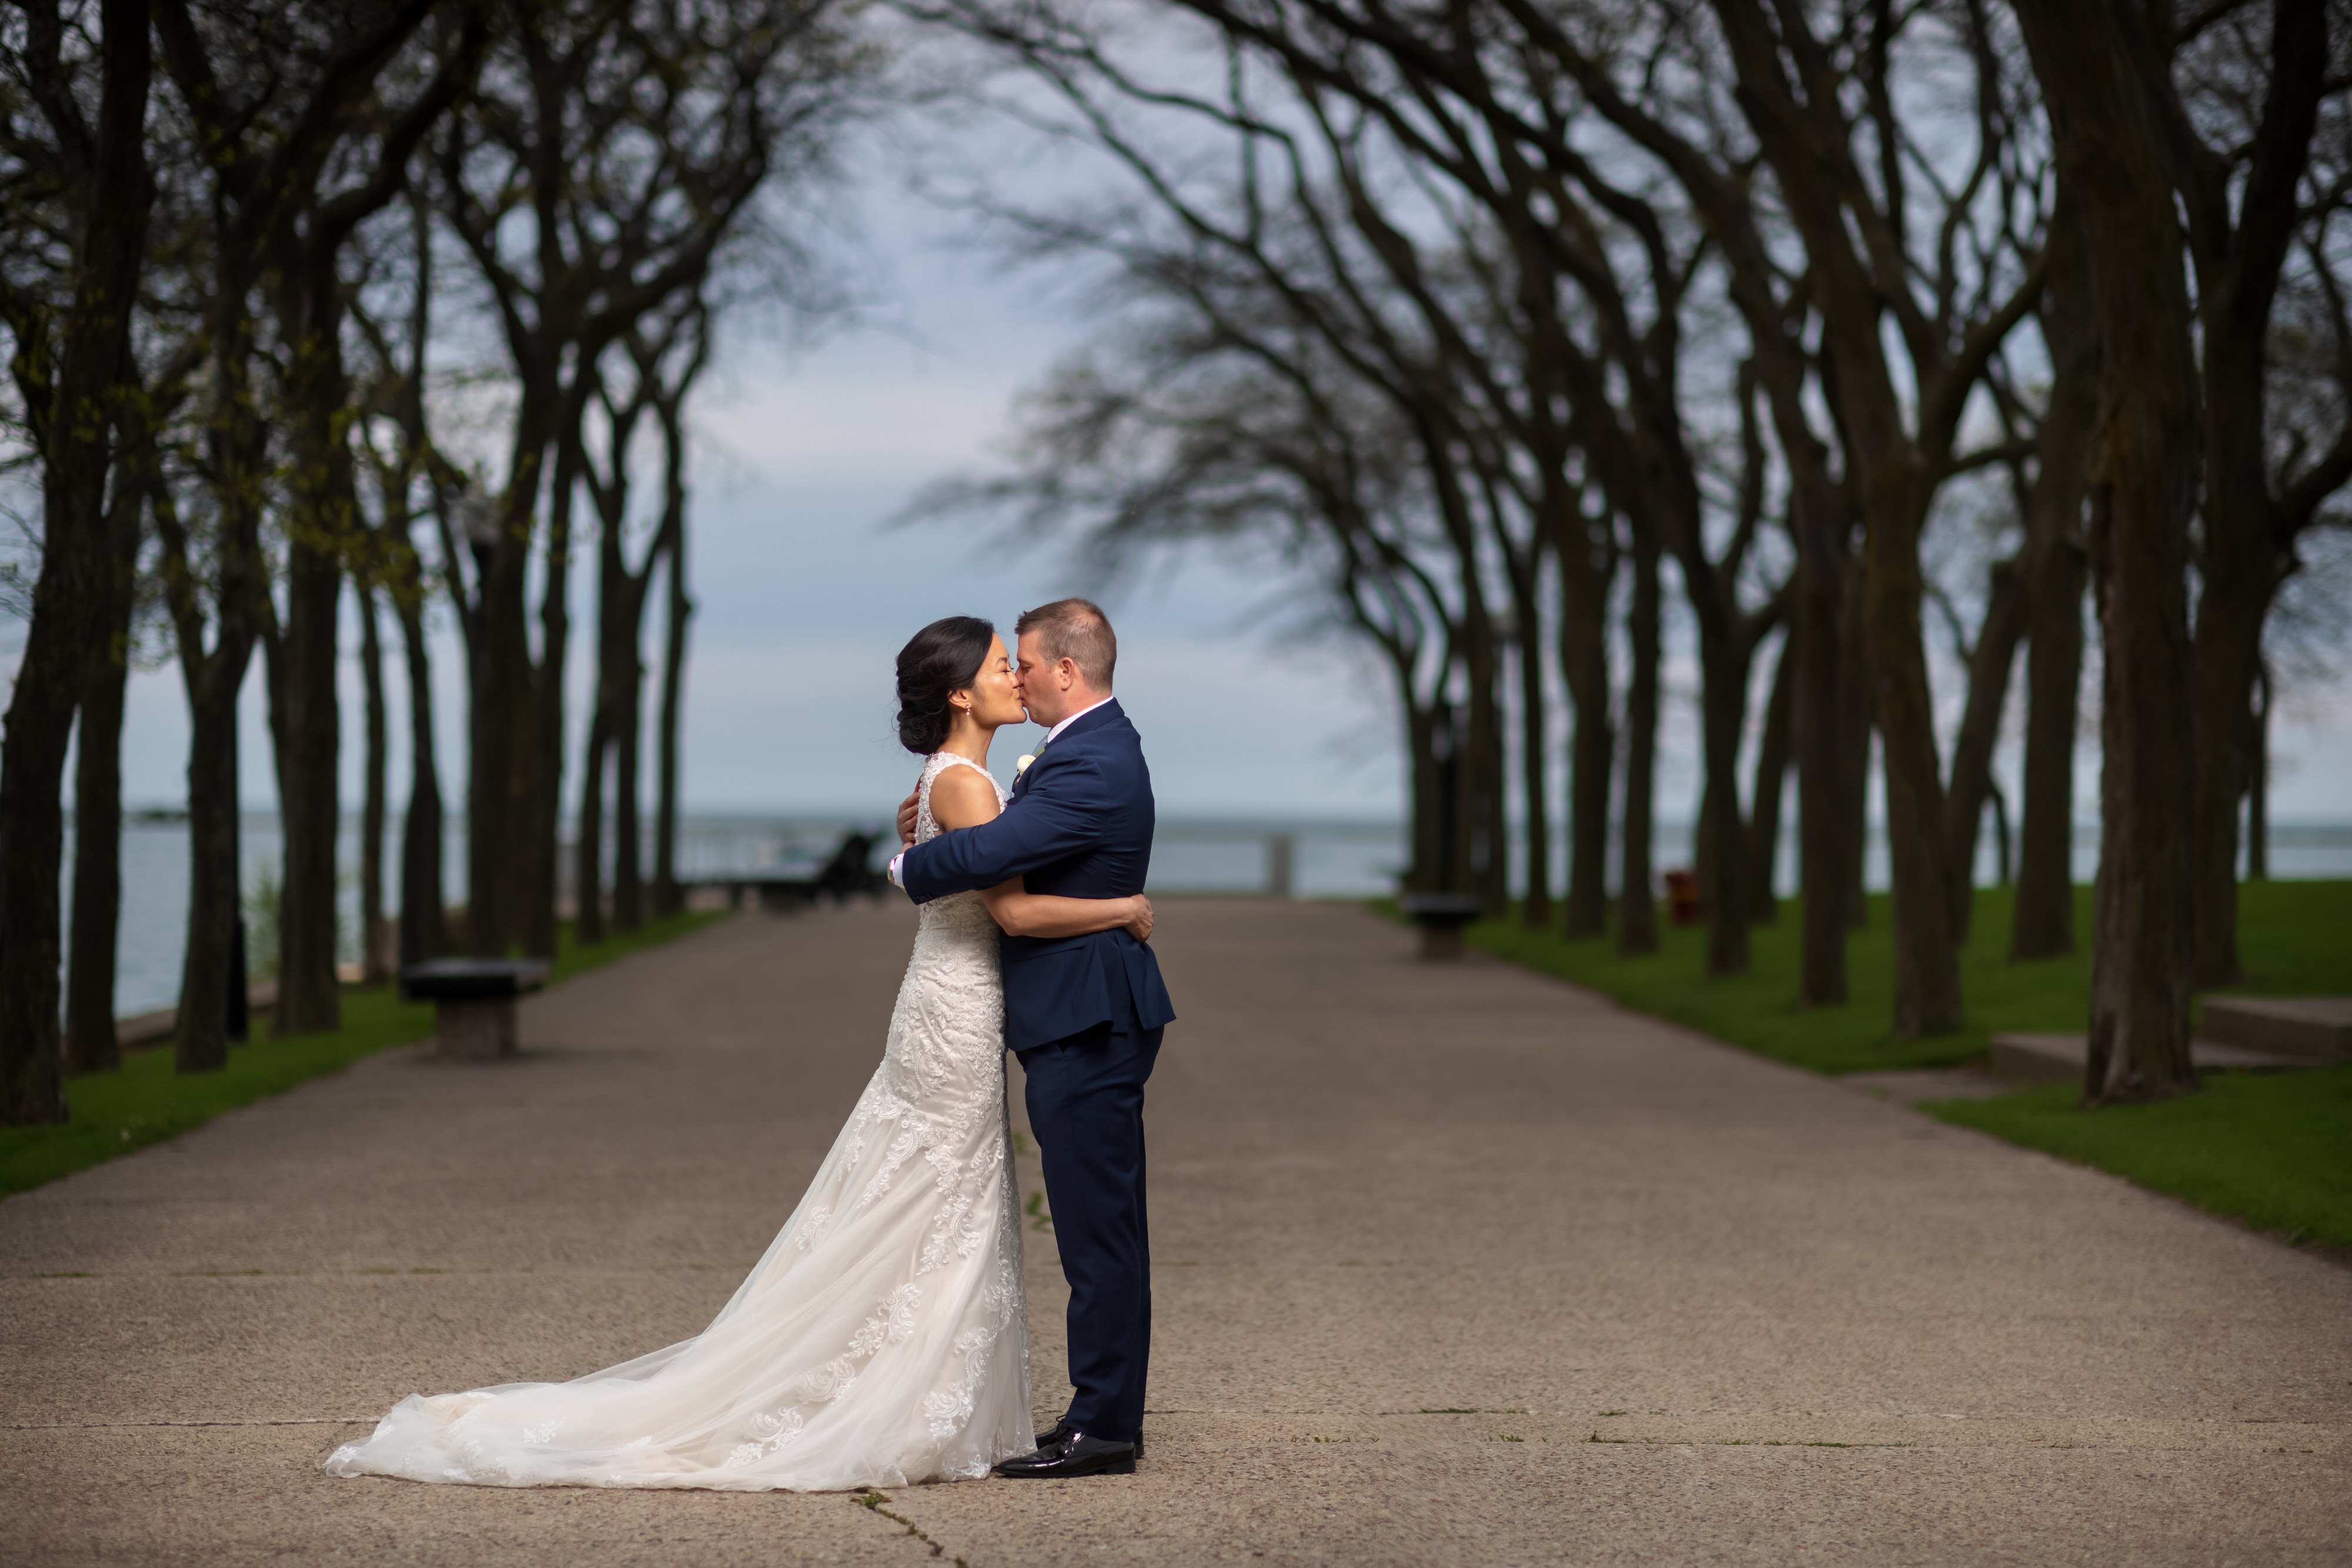 Bride and groom pose for wedding portrait at Milton Lee Olive Park in Chicago with skyline and lake in the background